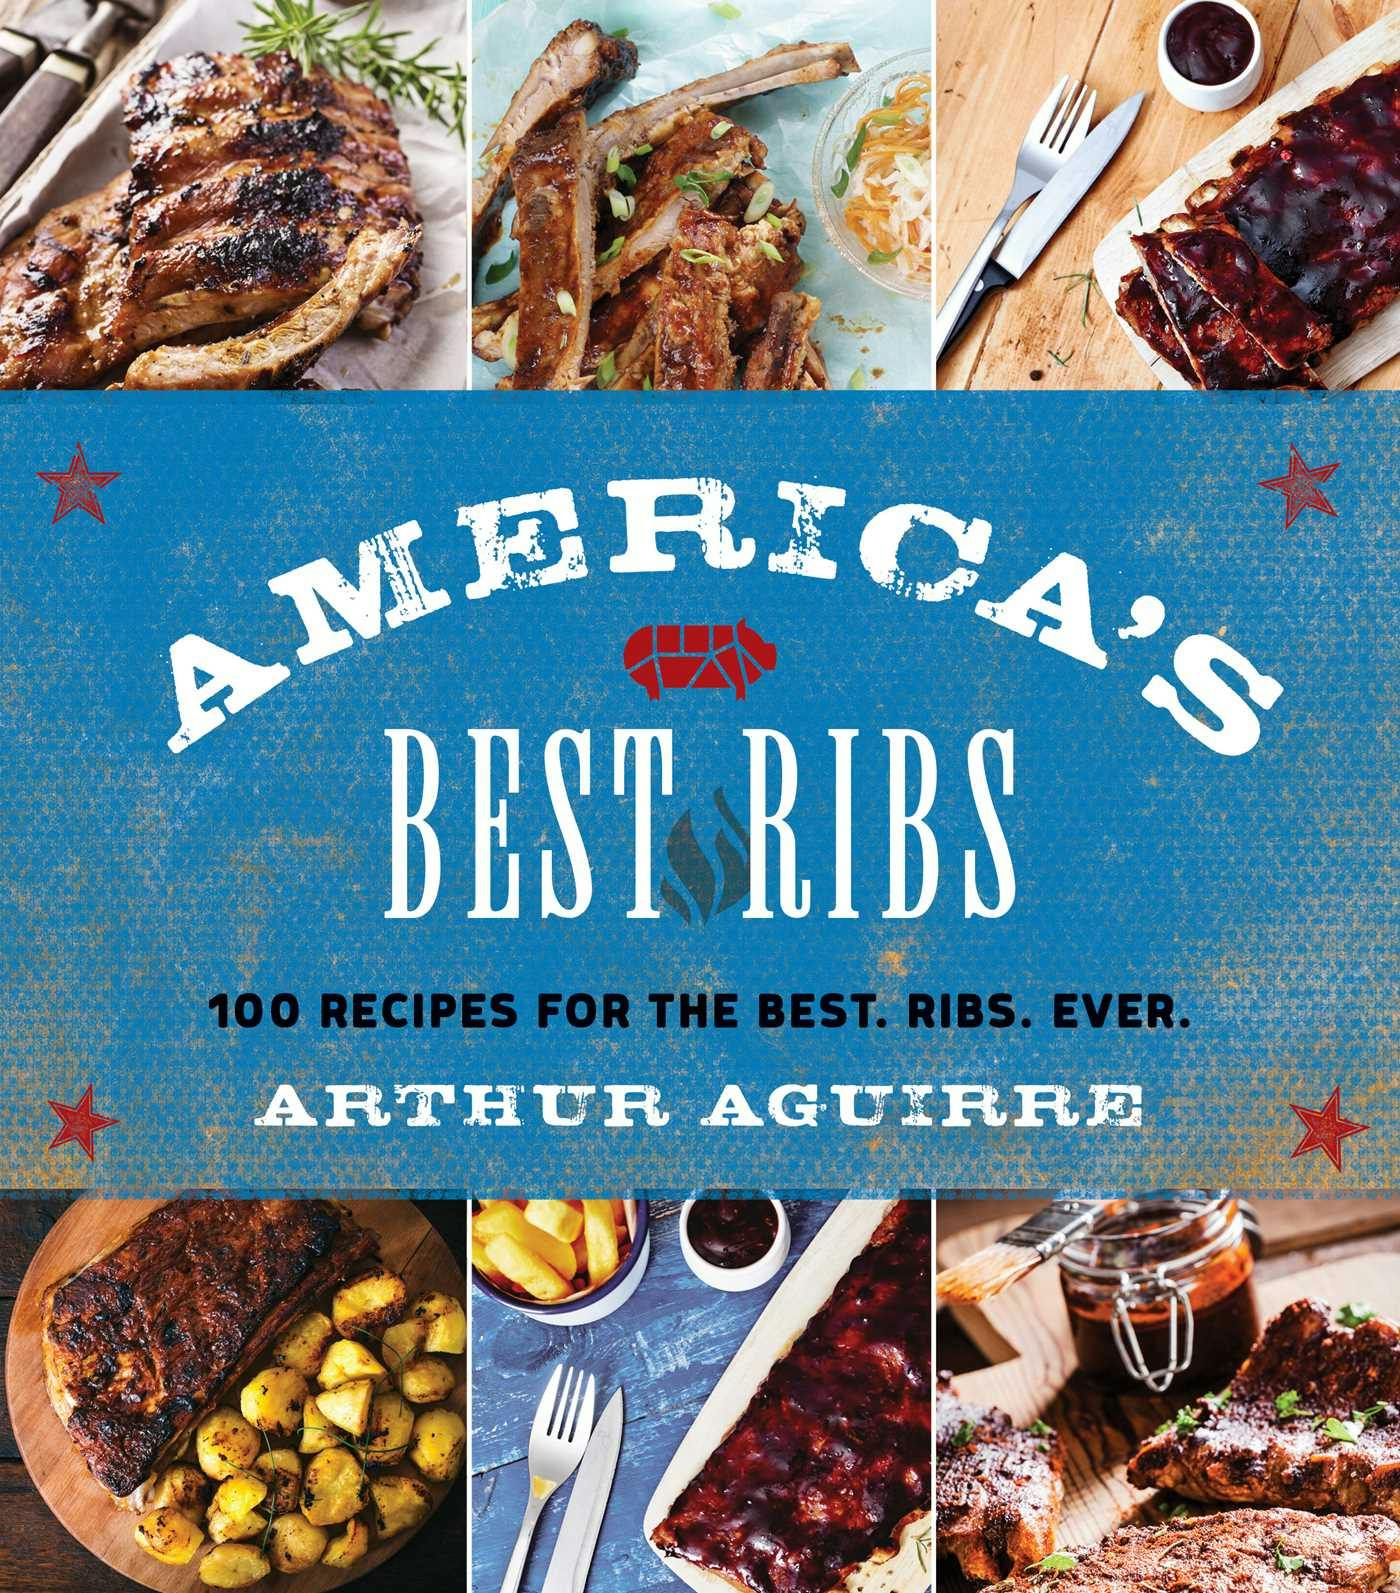 America's Best Ribs: 100 Recipes for the Best. Ribs. Ever. - Arthur Aguirre